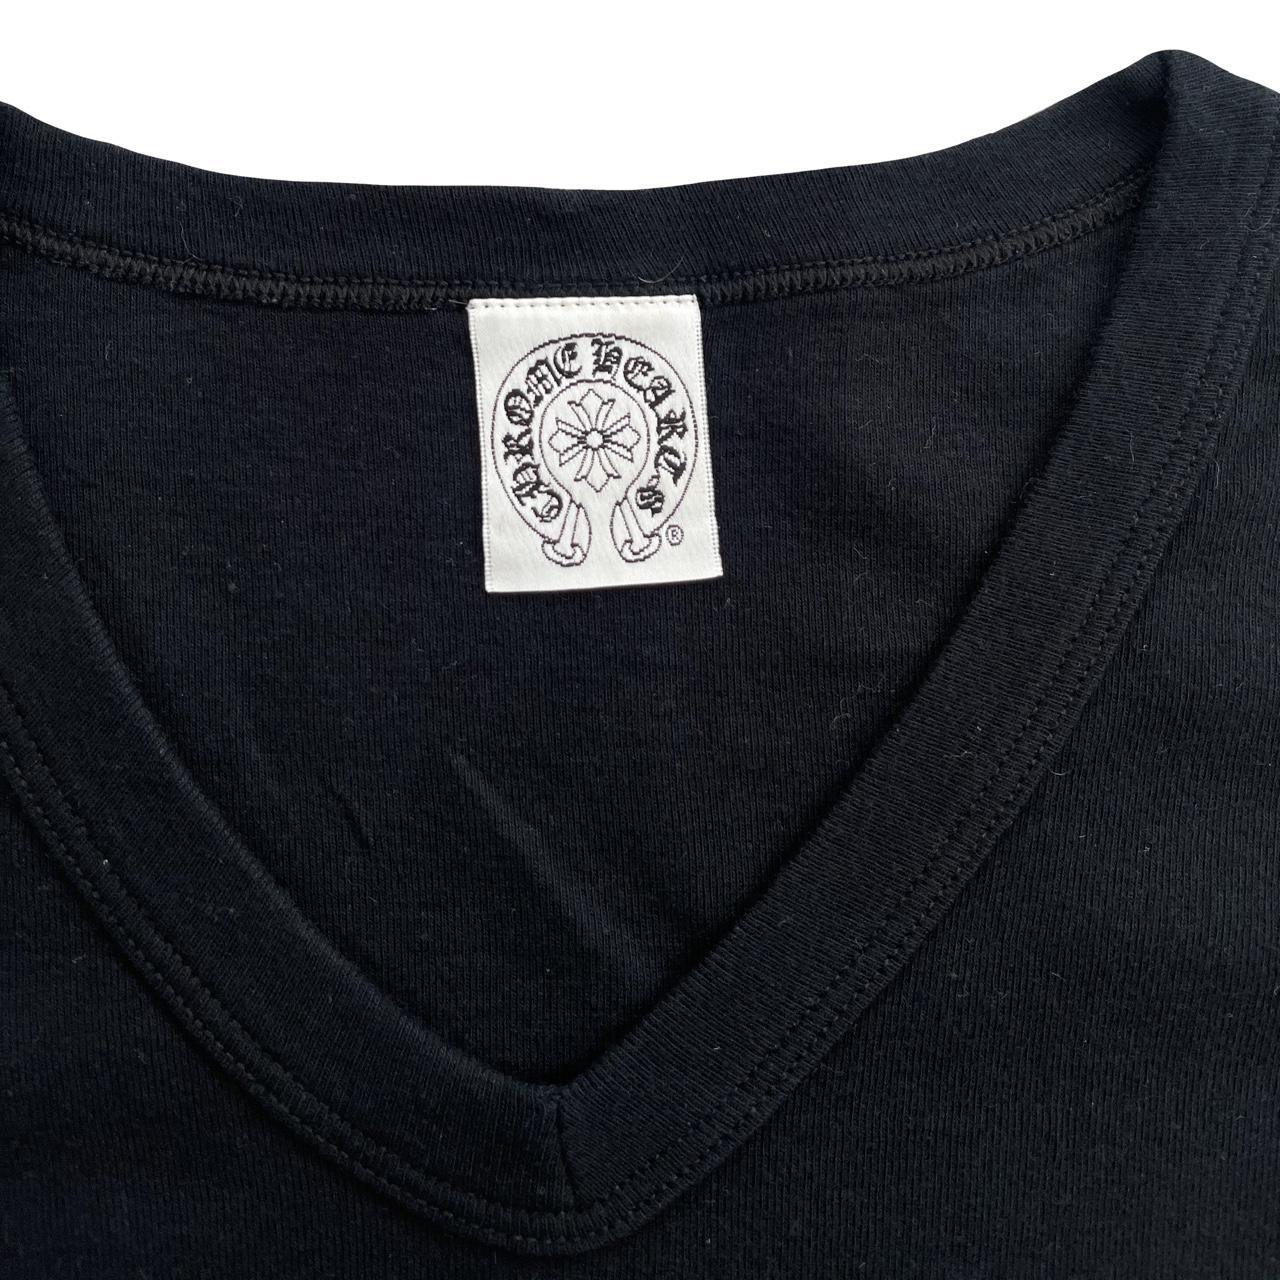 Chrome Hearts Tank Top - Known Source